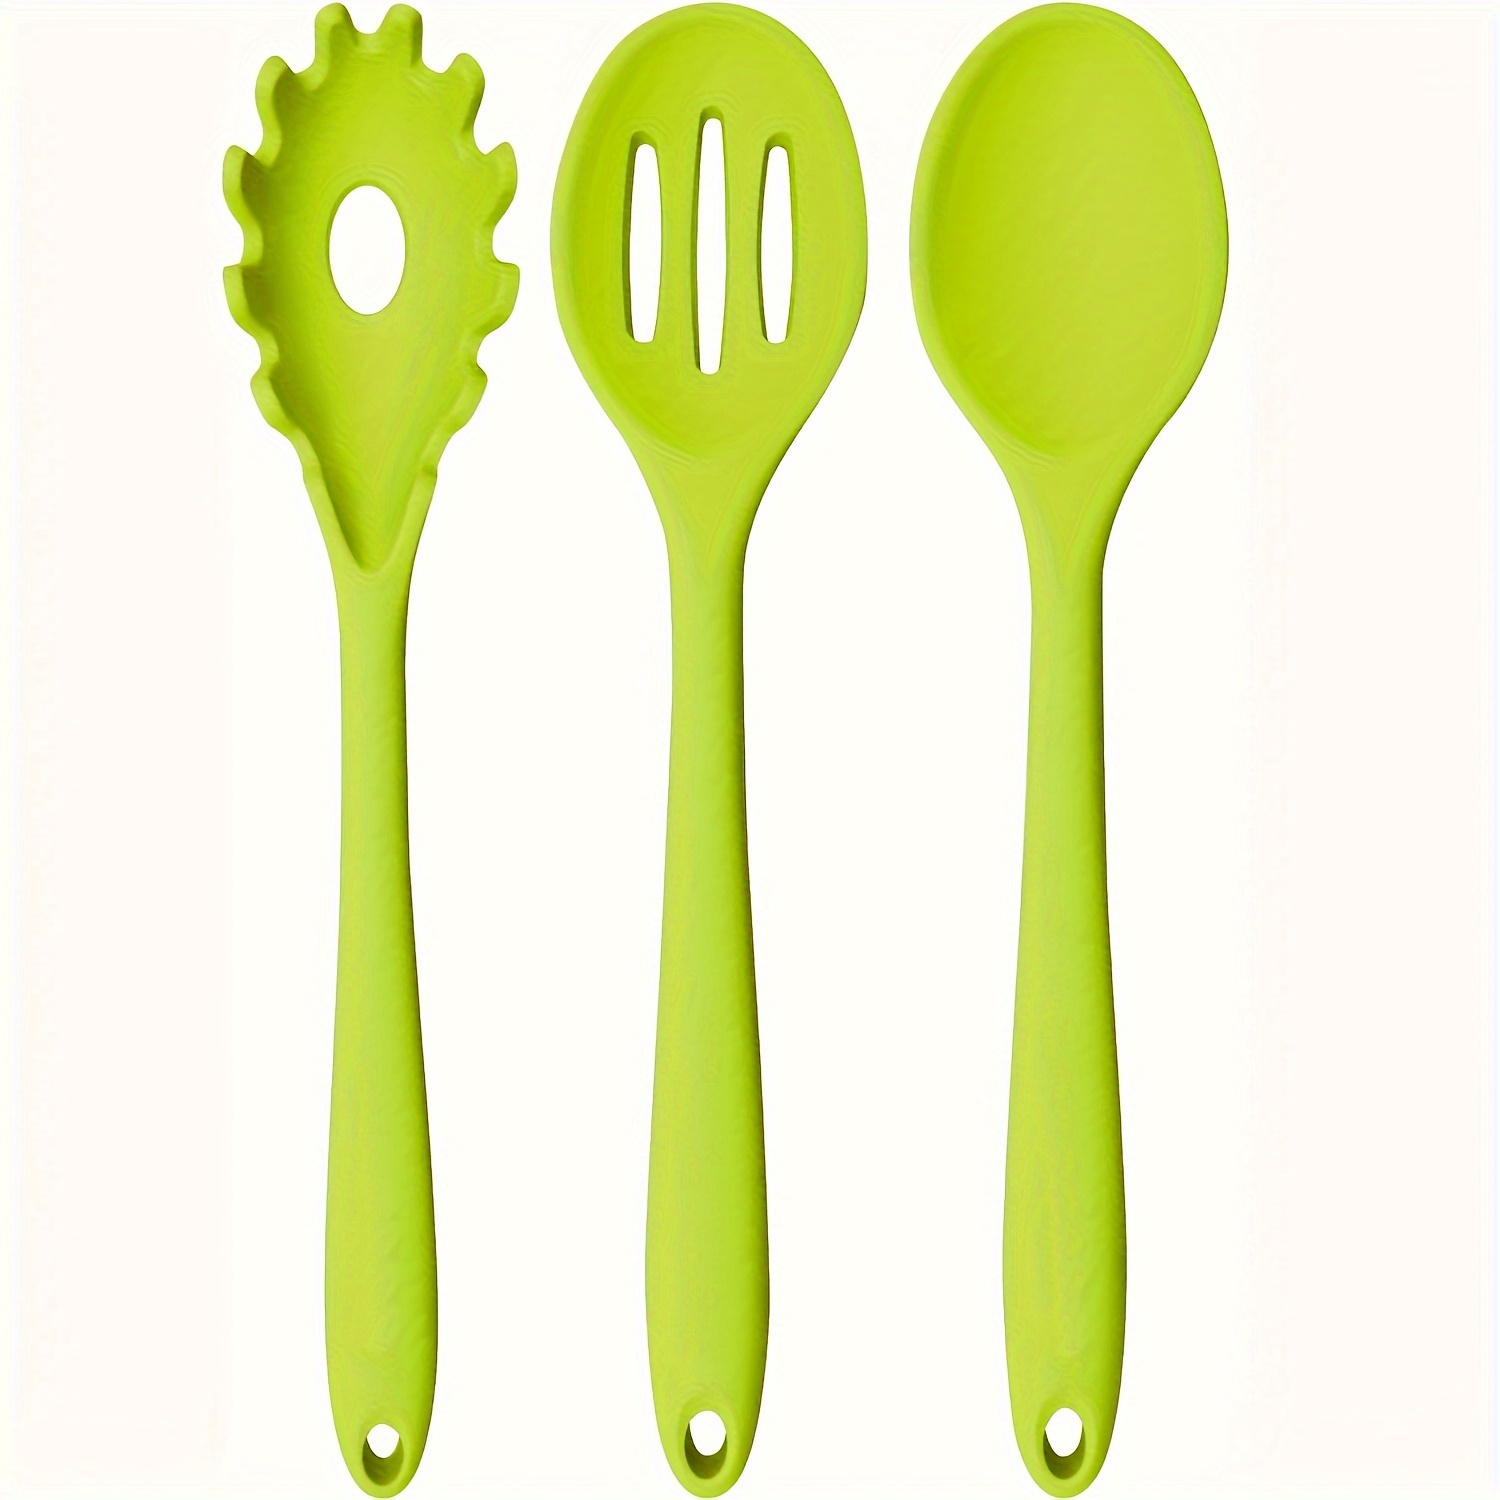 Silicone Spoon,6 Pieces Nonstick Silicone Spoons for Cooking Silicone Mixing  Spo